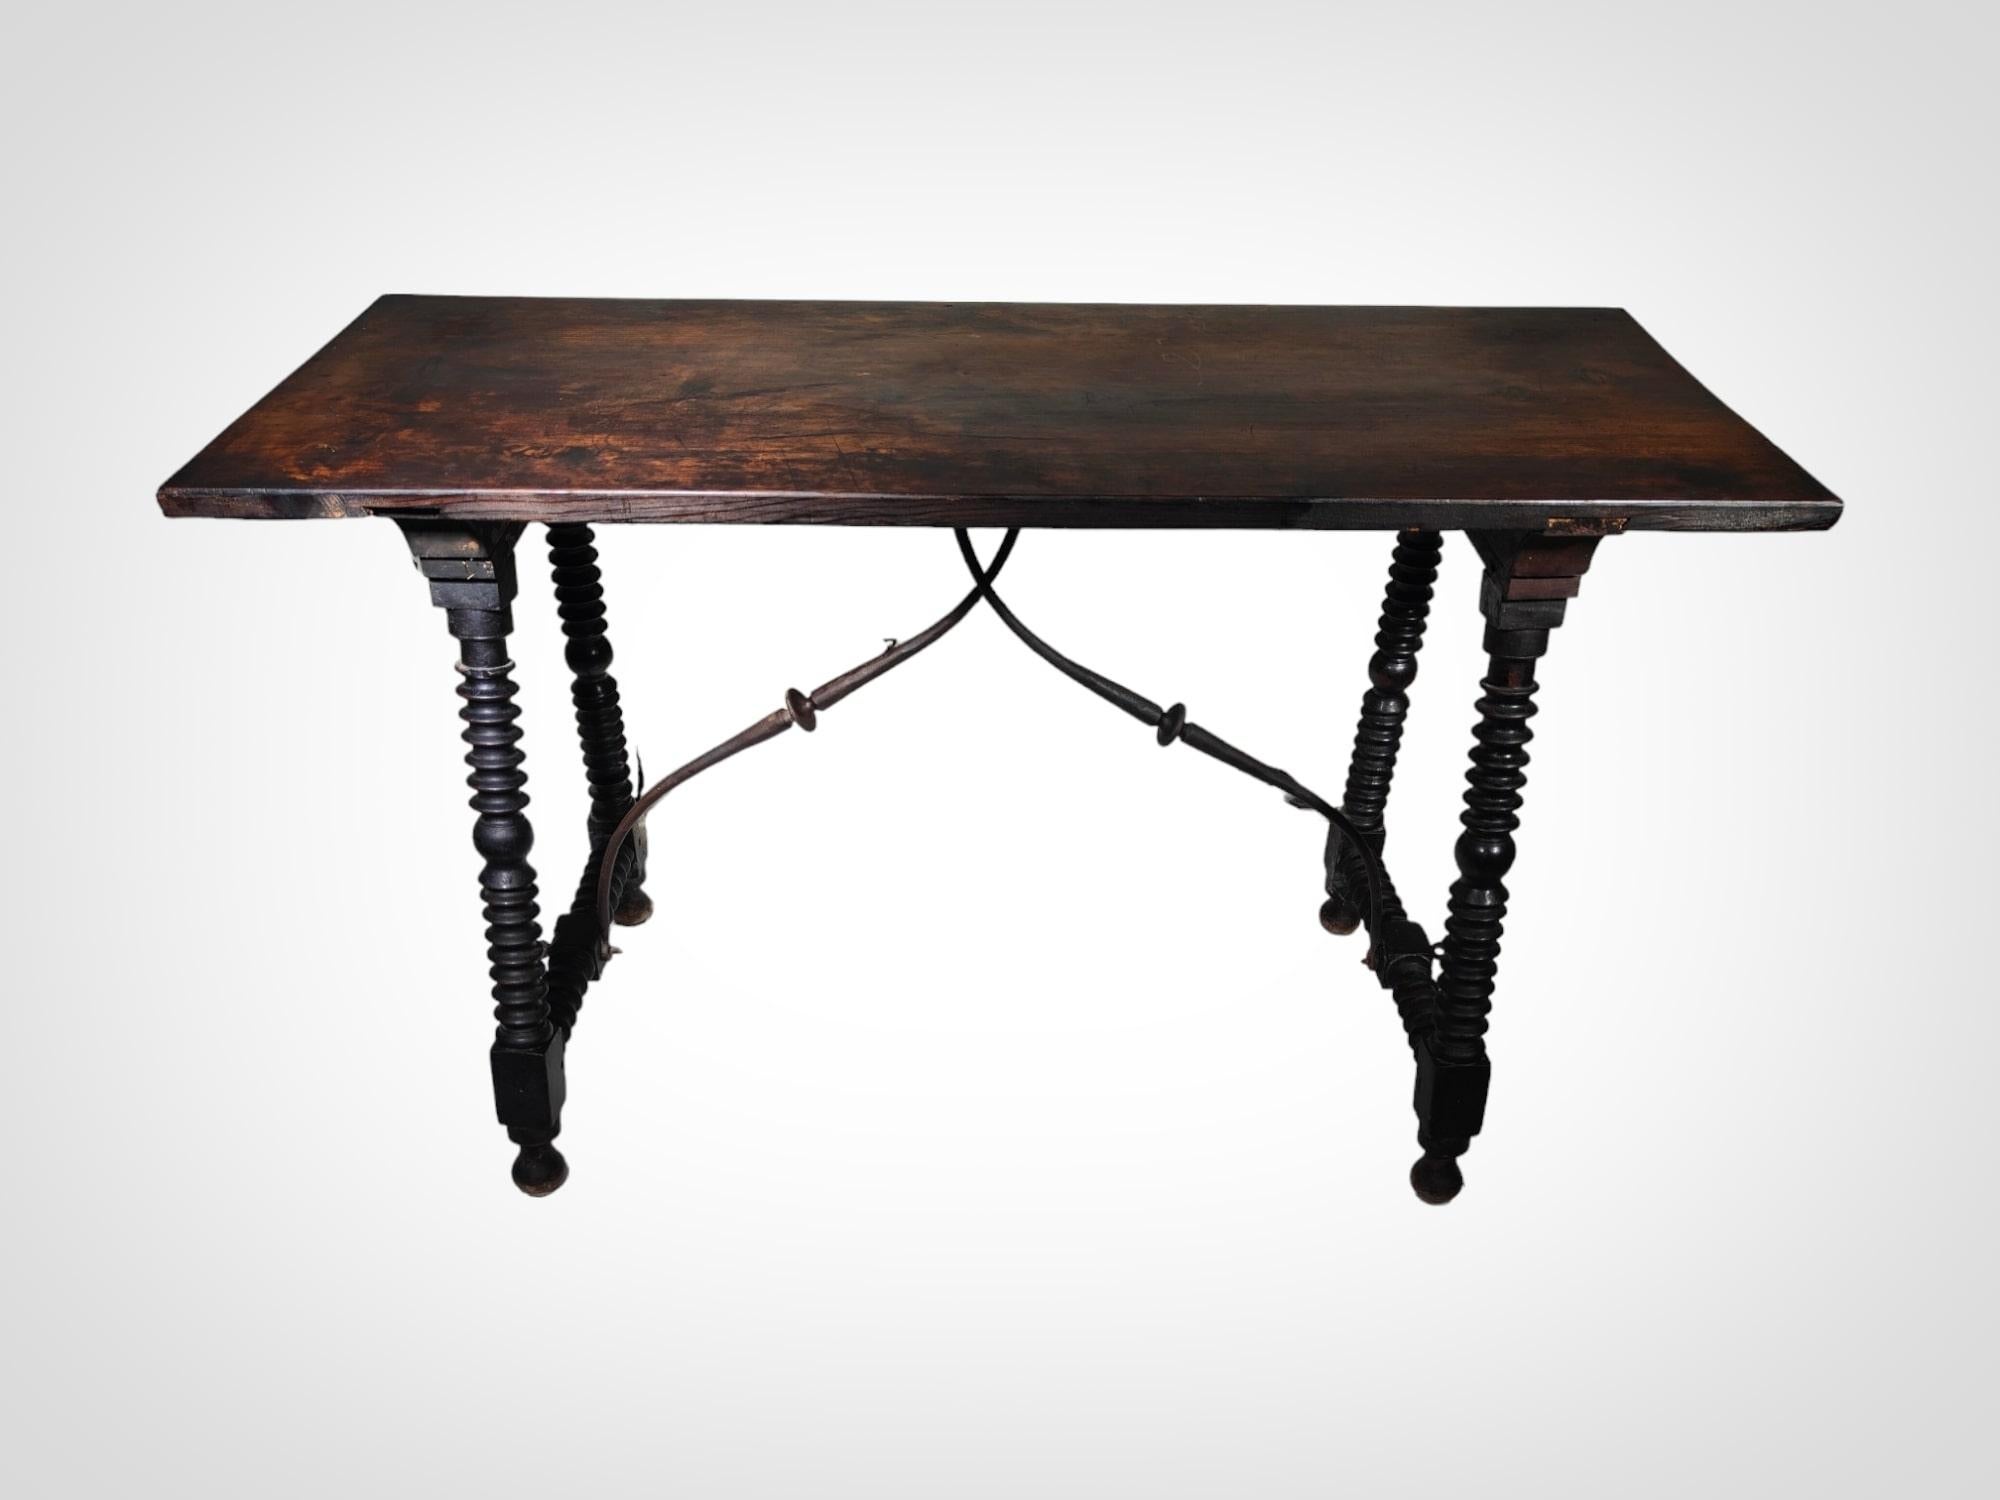 Immerse yourself in the timeless elegance of this Spanish table from the 17th century, a true masterpiece that showcases the craftsmanship of the era. With its turned legs and intricately forged iron hardware, this table is a testament to the